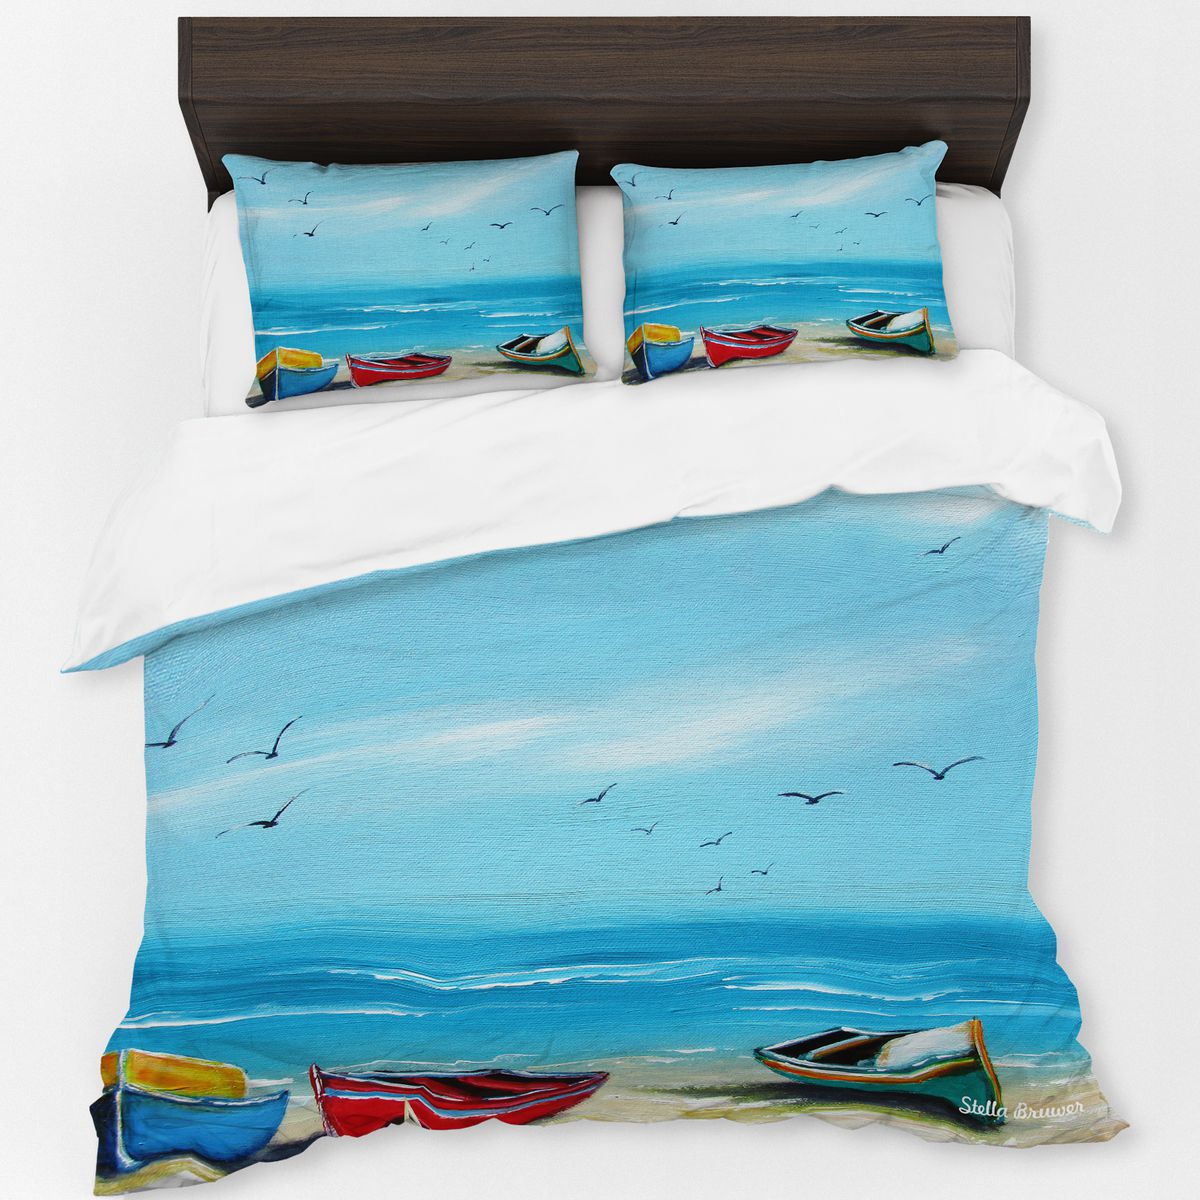 Three Dinghy Boats By Stella Bruwer Duvet Cover Set